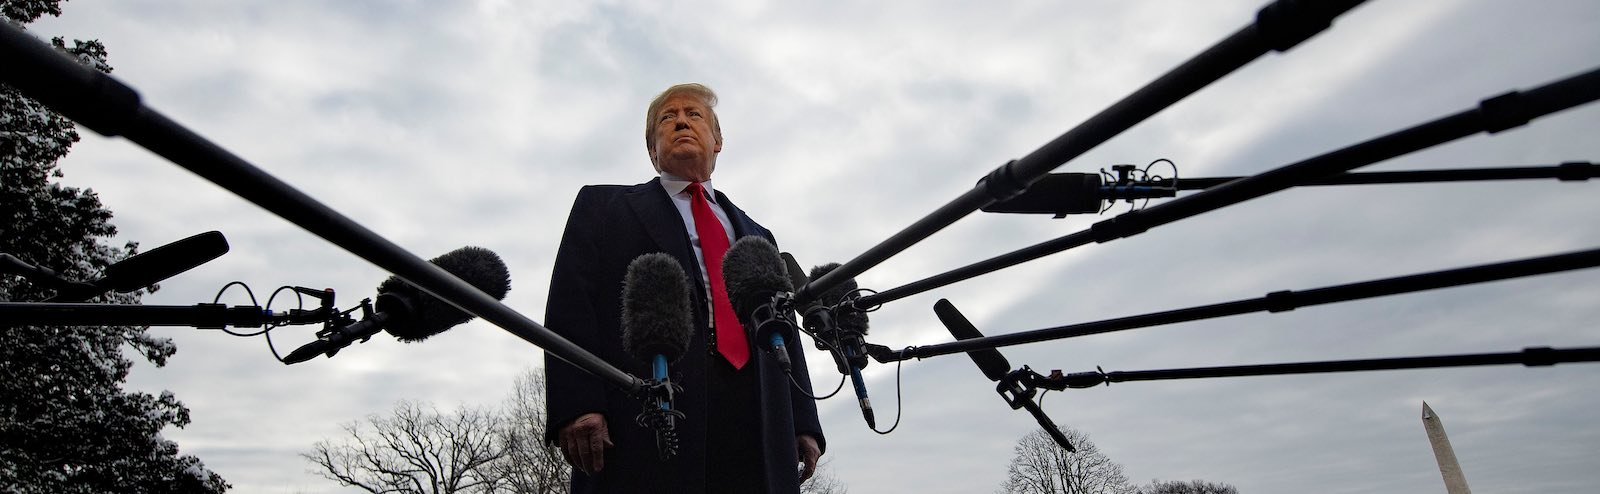 Big cable news channels have, on one estimate, given Donald Trump three times as much coverage as his predecessor (Photo: Jim Watson via Getty)